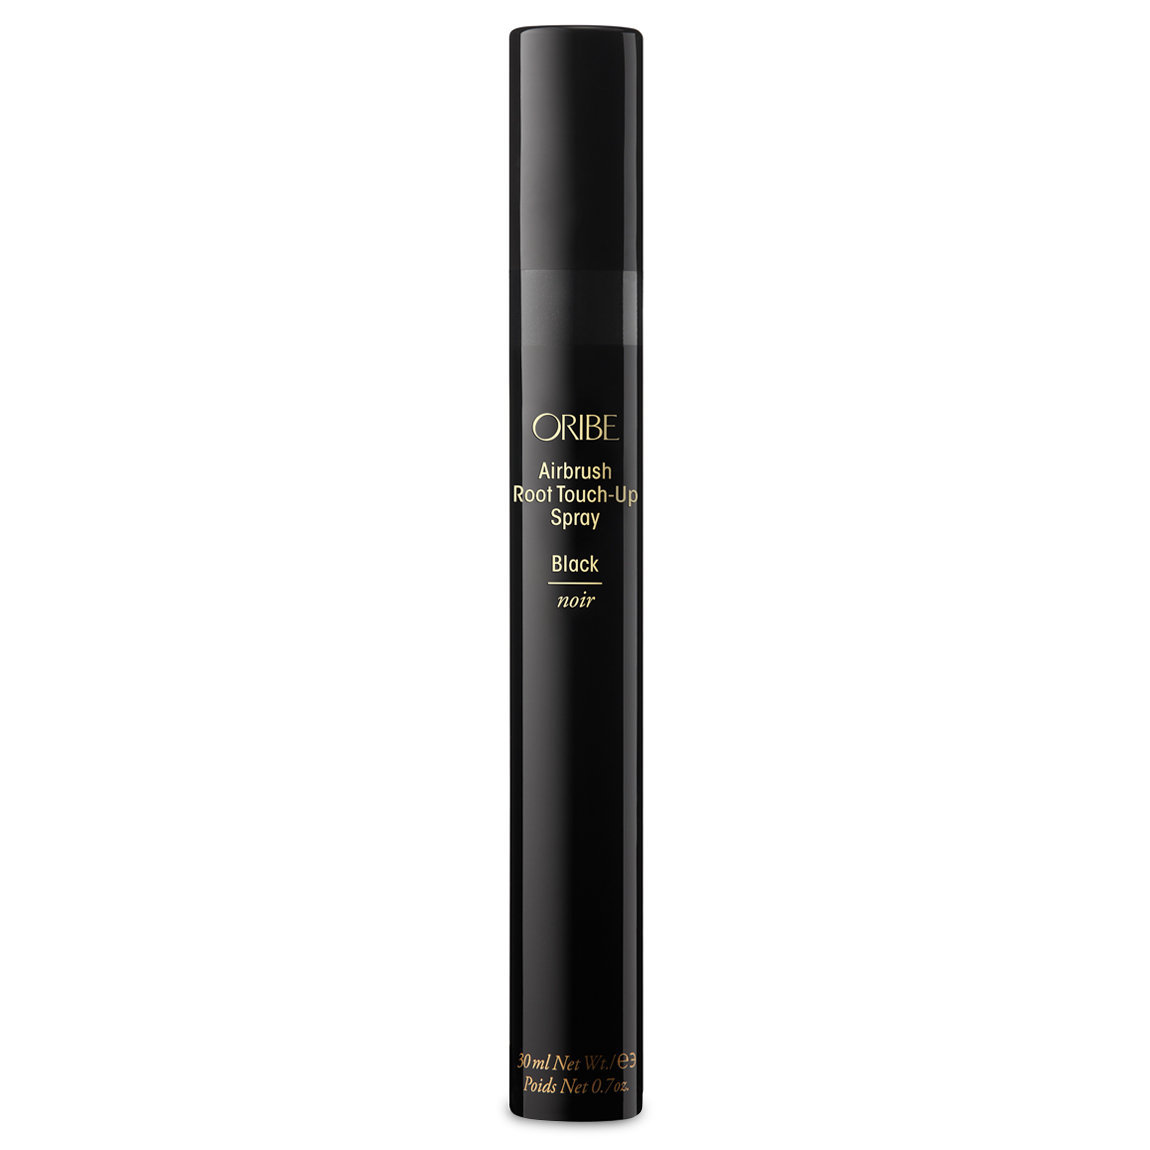 Oribe Airbrush Root Touch-Up Spray Black alternative view 1.